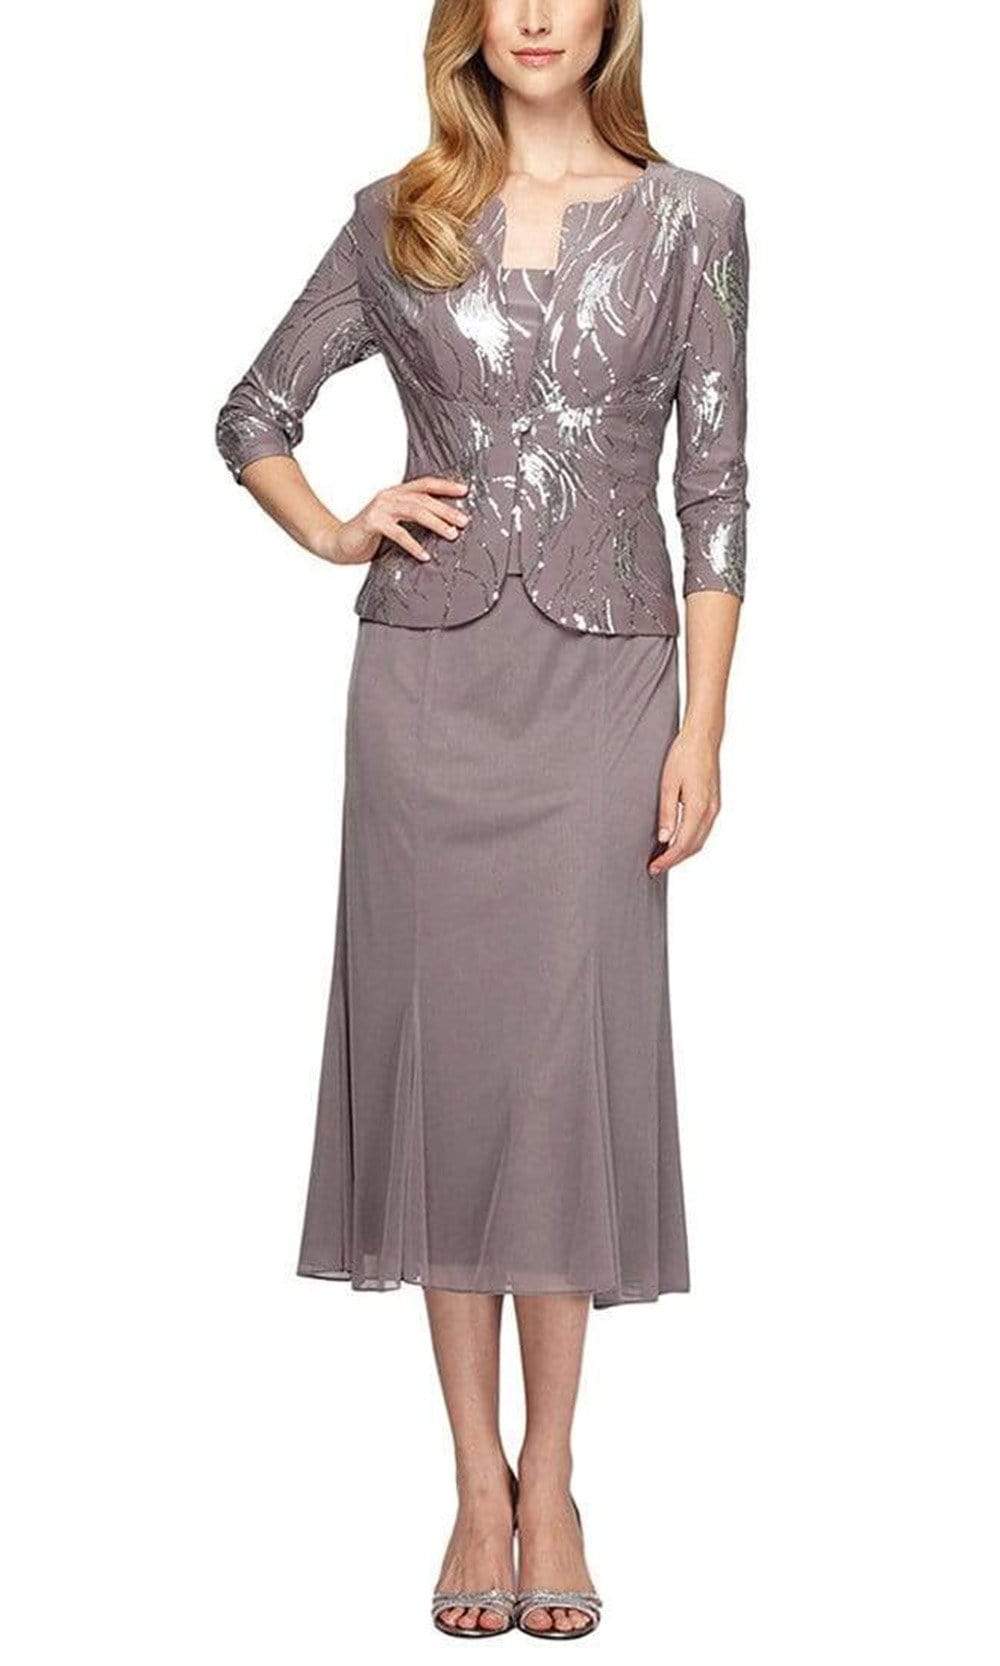 Image of Alex Evenings - 196267 Chiffon Dress with Sequin Embellished Jacket